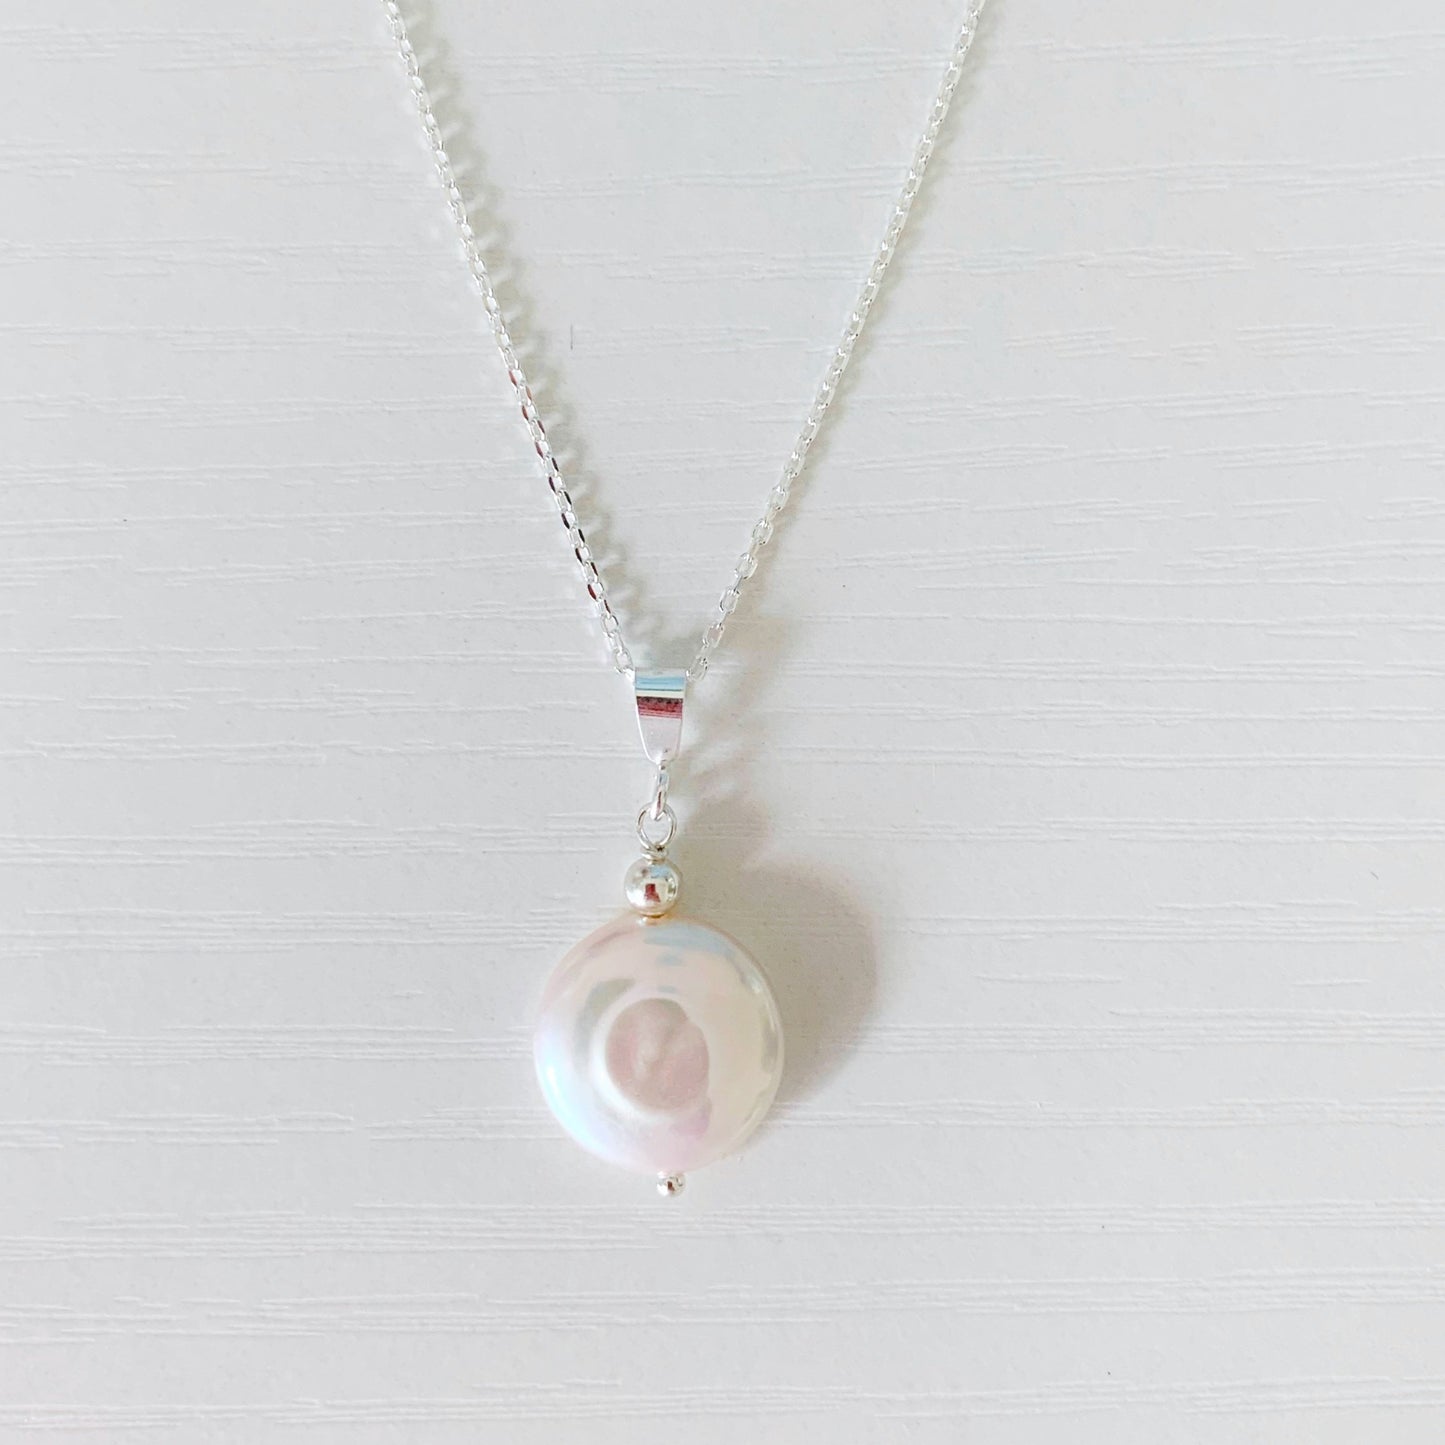 the newport gala necklace is created with a large freshwater coin pearl suspended from dainty sterling silver chain. this necklace is photographed on a white surface